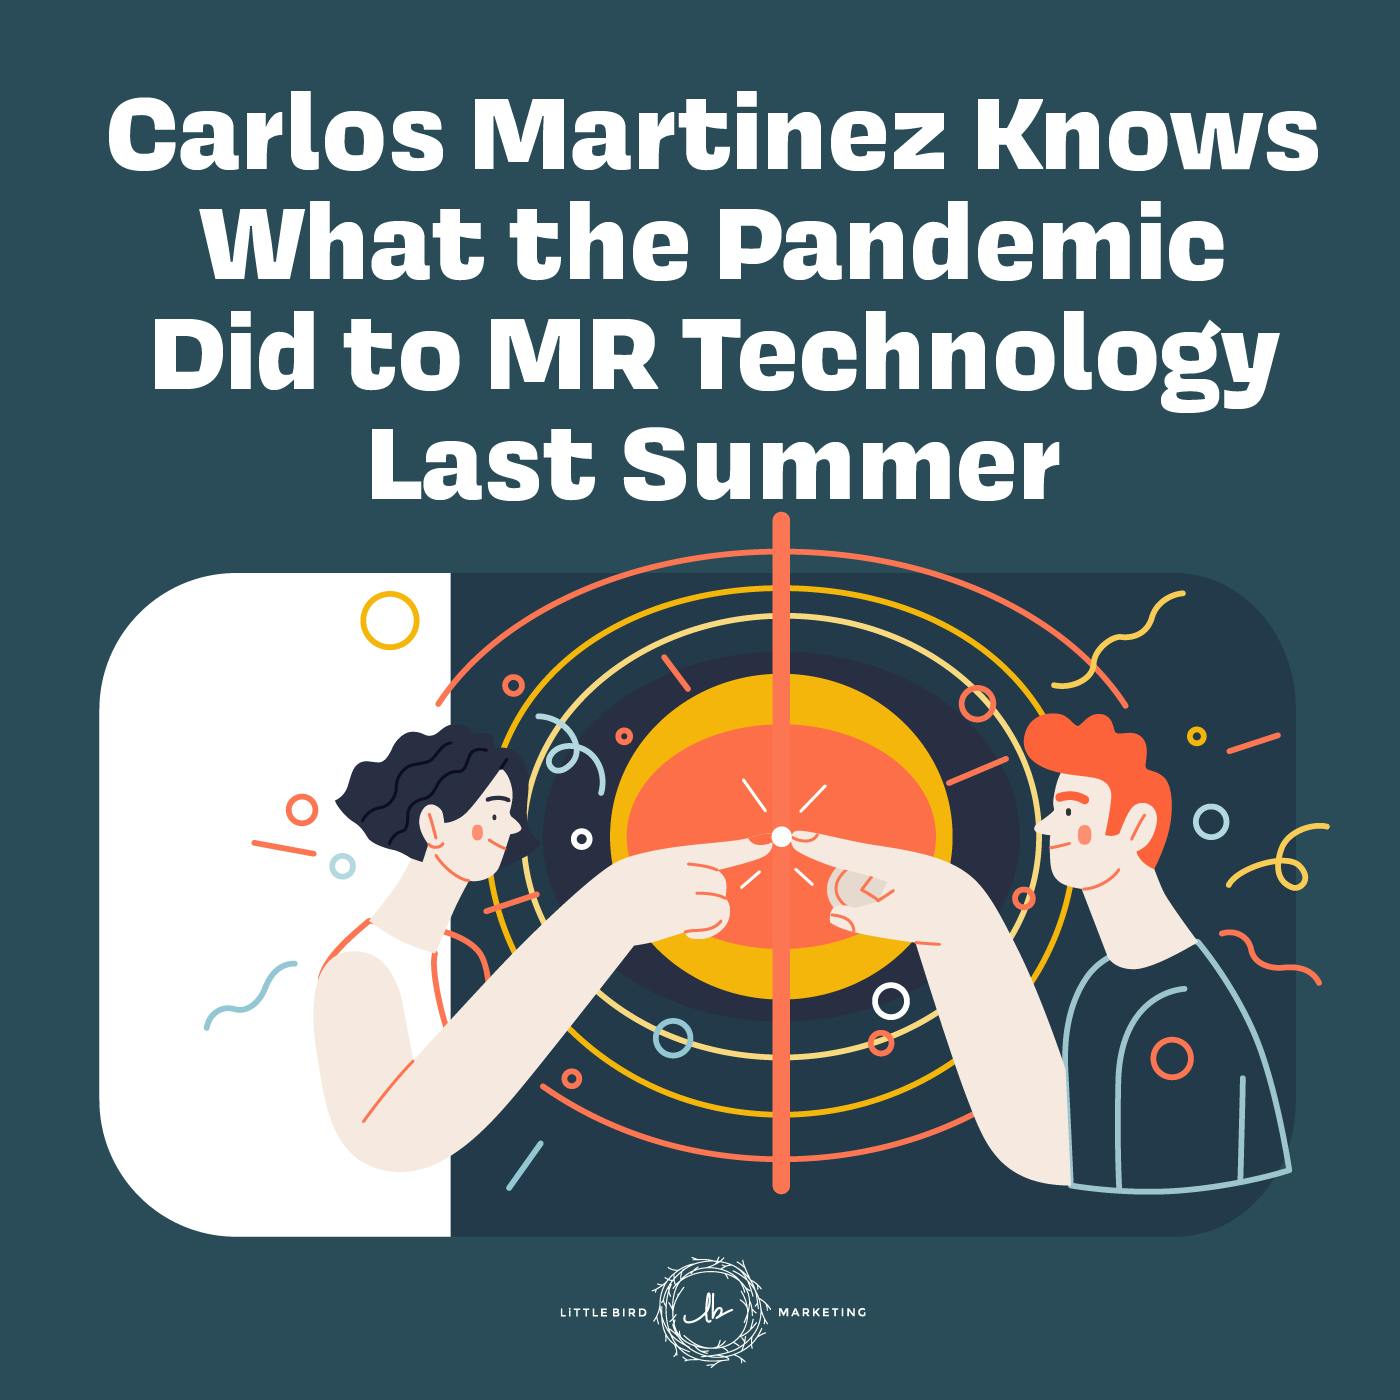 Carlos Martinez Knows What the Pandemic Did to MR Technology Last Summer